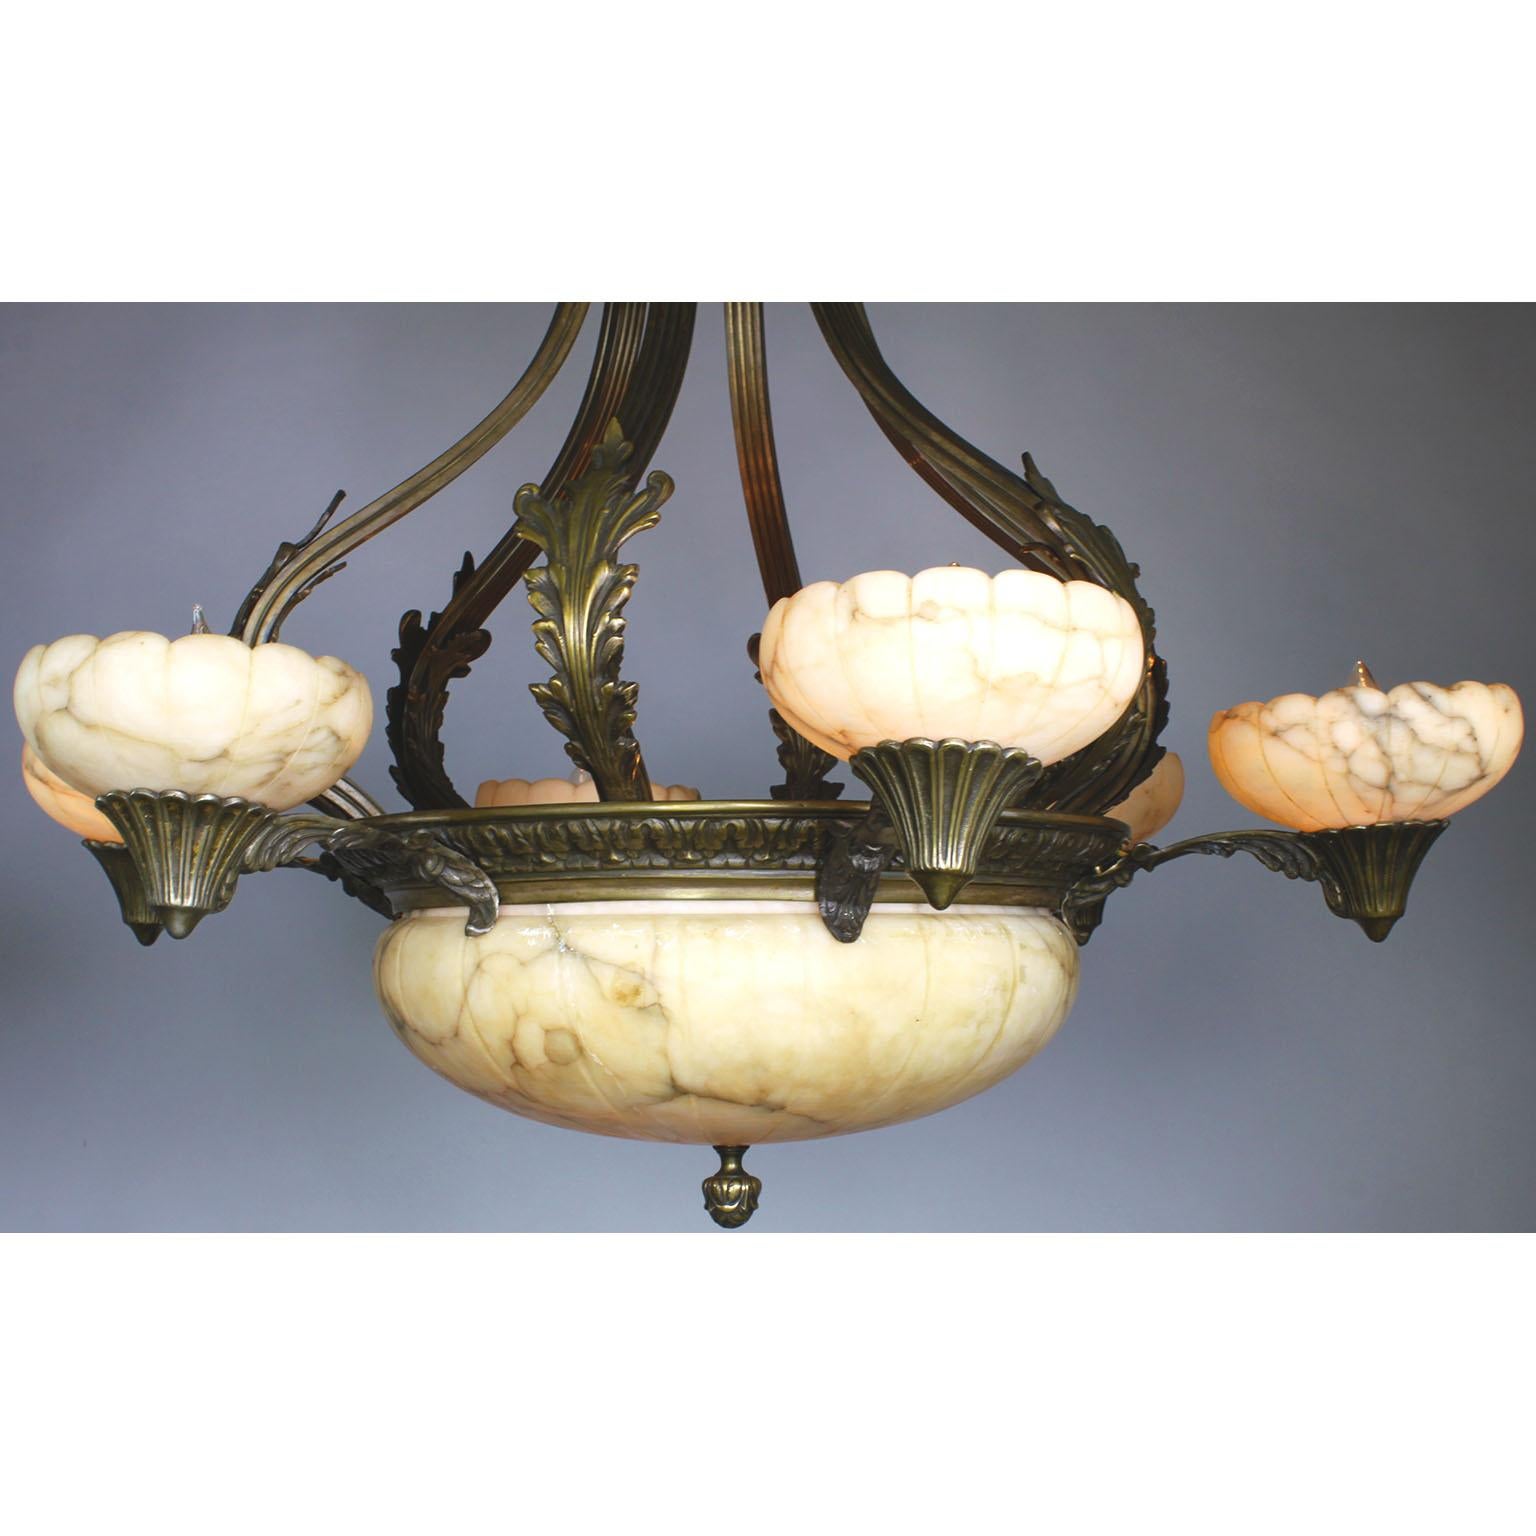 A large French early 20th century Art-Deco bronze and carved veined ivory-colored alabaster six-light chandelier. The carved circular alabaster plafonnier with a floral bronze apron and four interior lights, surmounted with six alabaster cone-shaped